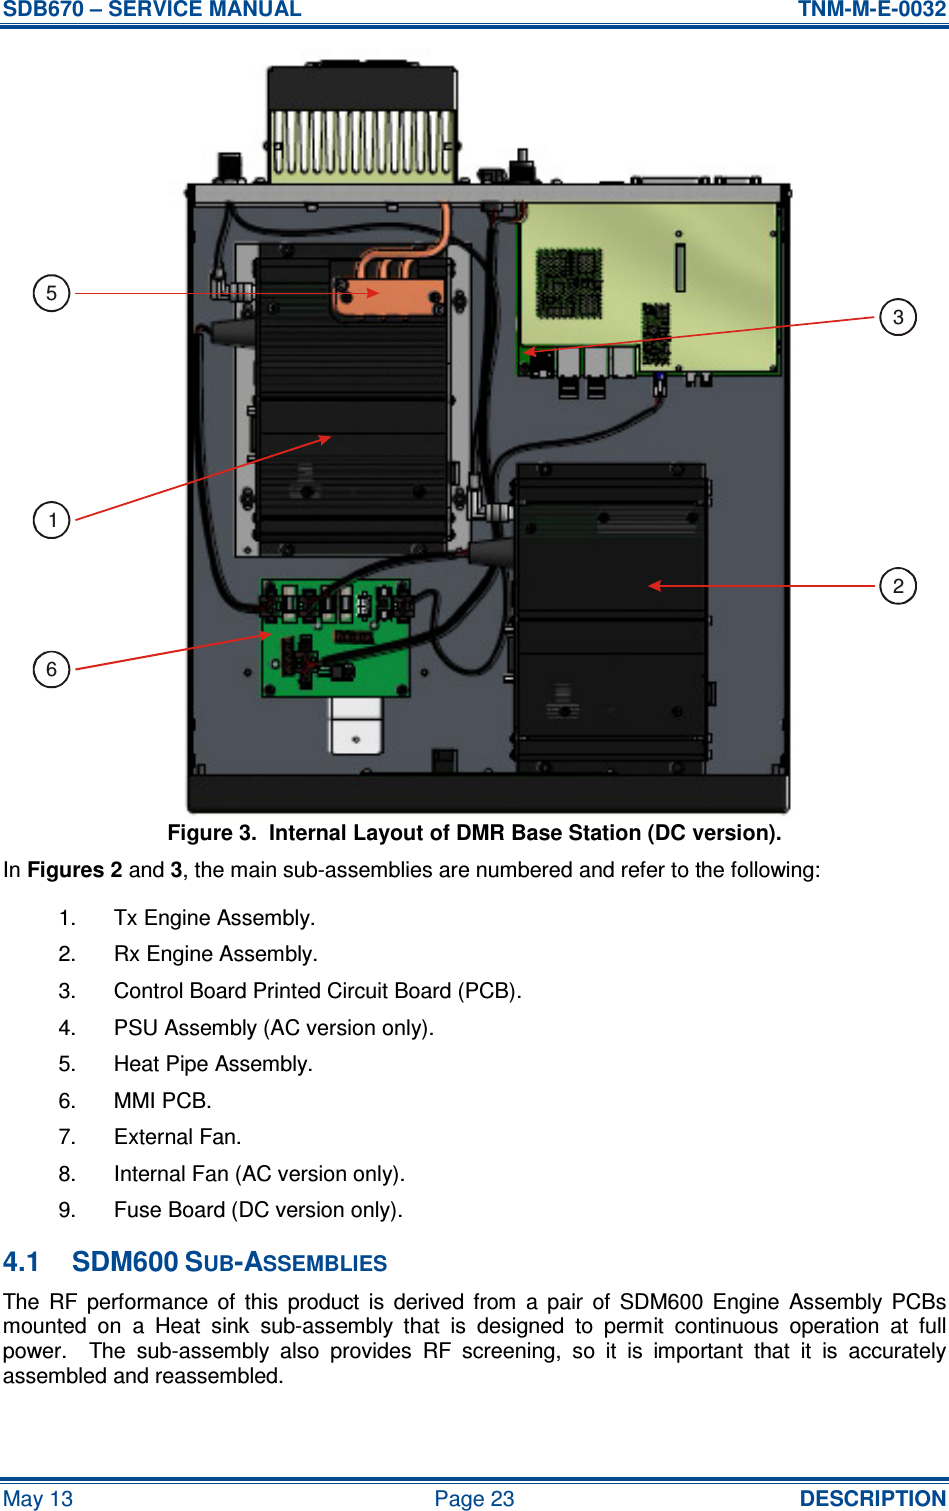 SDB670 – SERVICE MANUAL  TNM-M-E-0032 May 13  Page 23  DESCRIPTION Figure 3.  Internal Layout of DMR Base Station (DC version). In Figures 2 and 3, the main sub-assemblies are numbered and refer to the following: 1.  Tx Engine Assembly. 2.  Rx Engine Assembly. 3.  Control Board Printed Circuit Board (PCB). 4.  PSU Assembly (AC version only). 5.  Heat Pipe Assembly. 6.  MMI PCB. 7.  External Fan. 8.  Internal Fan (AC version only). 9.  Fuse Board (DC version only). 4.1  SDM600 SUB-ASSEMBLIES The  RF  performance  of  this  product  is  derived  from  a  pair  of  SDM600  Engine  Assembly  PCBs mounted  on  a  Heat  sink  sub-assembly  that  is  designed  to  permit  continuous  operation  at  full power.    The  sub-assembly  also  provides  RF  screening,  so  it  is  important  that  it  is  accurately assembled and reassembled.  52361